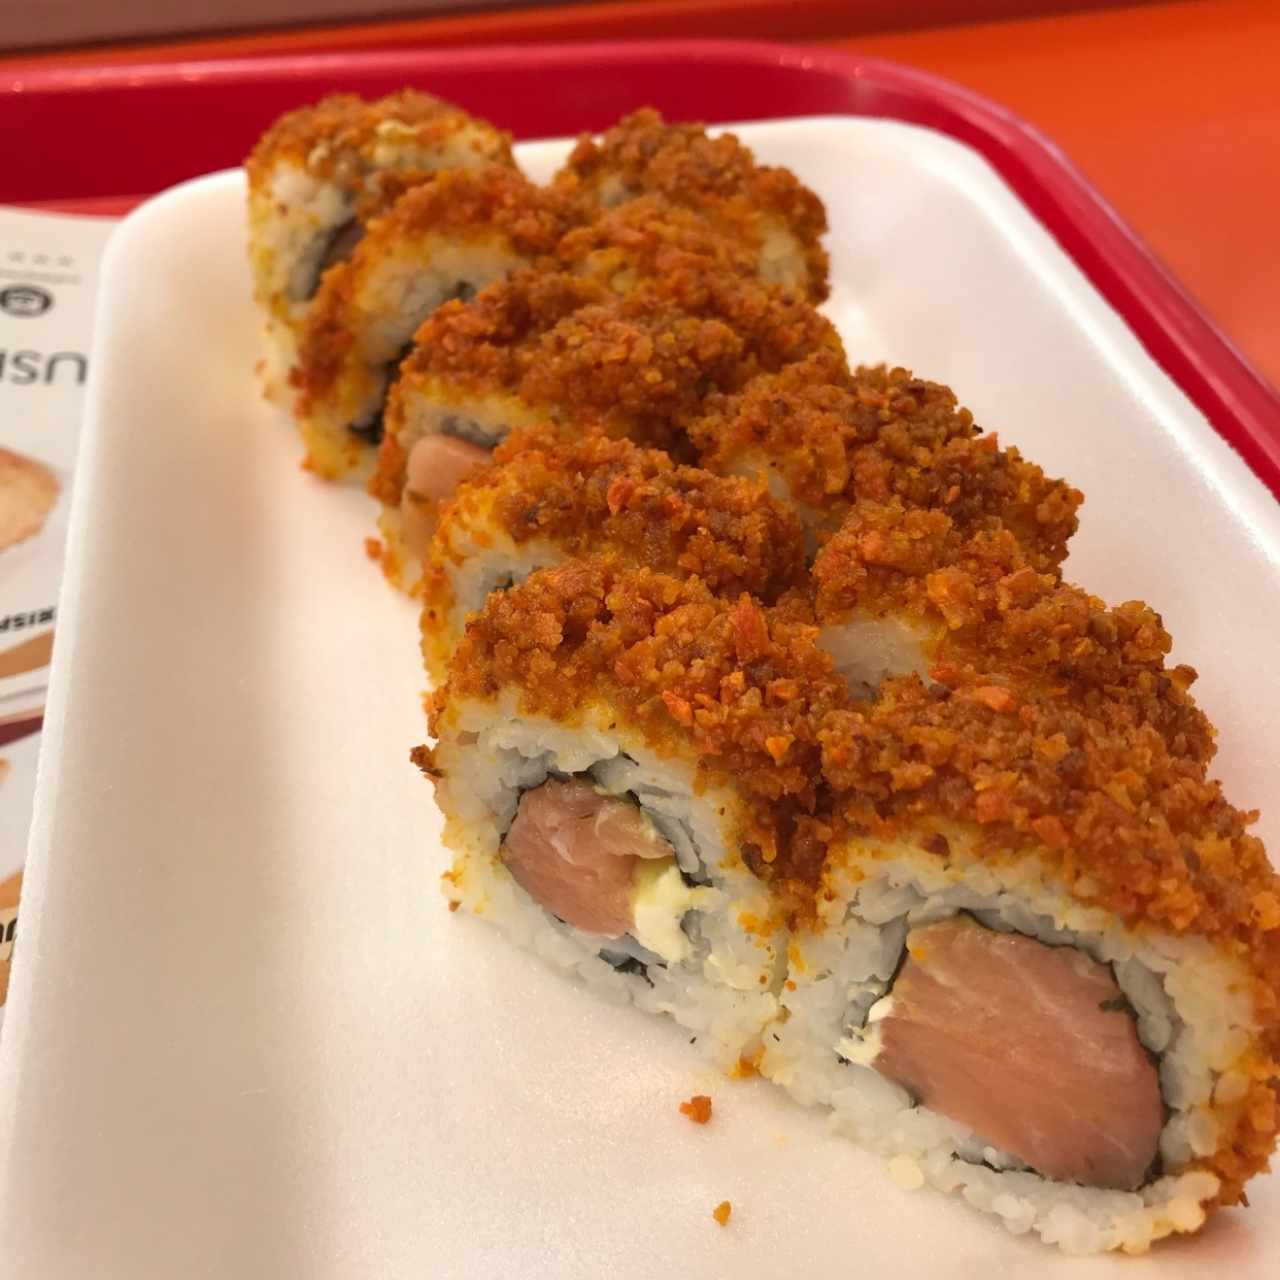 kronchi special roll